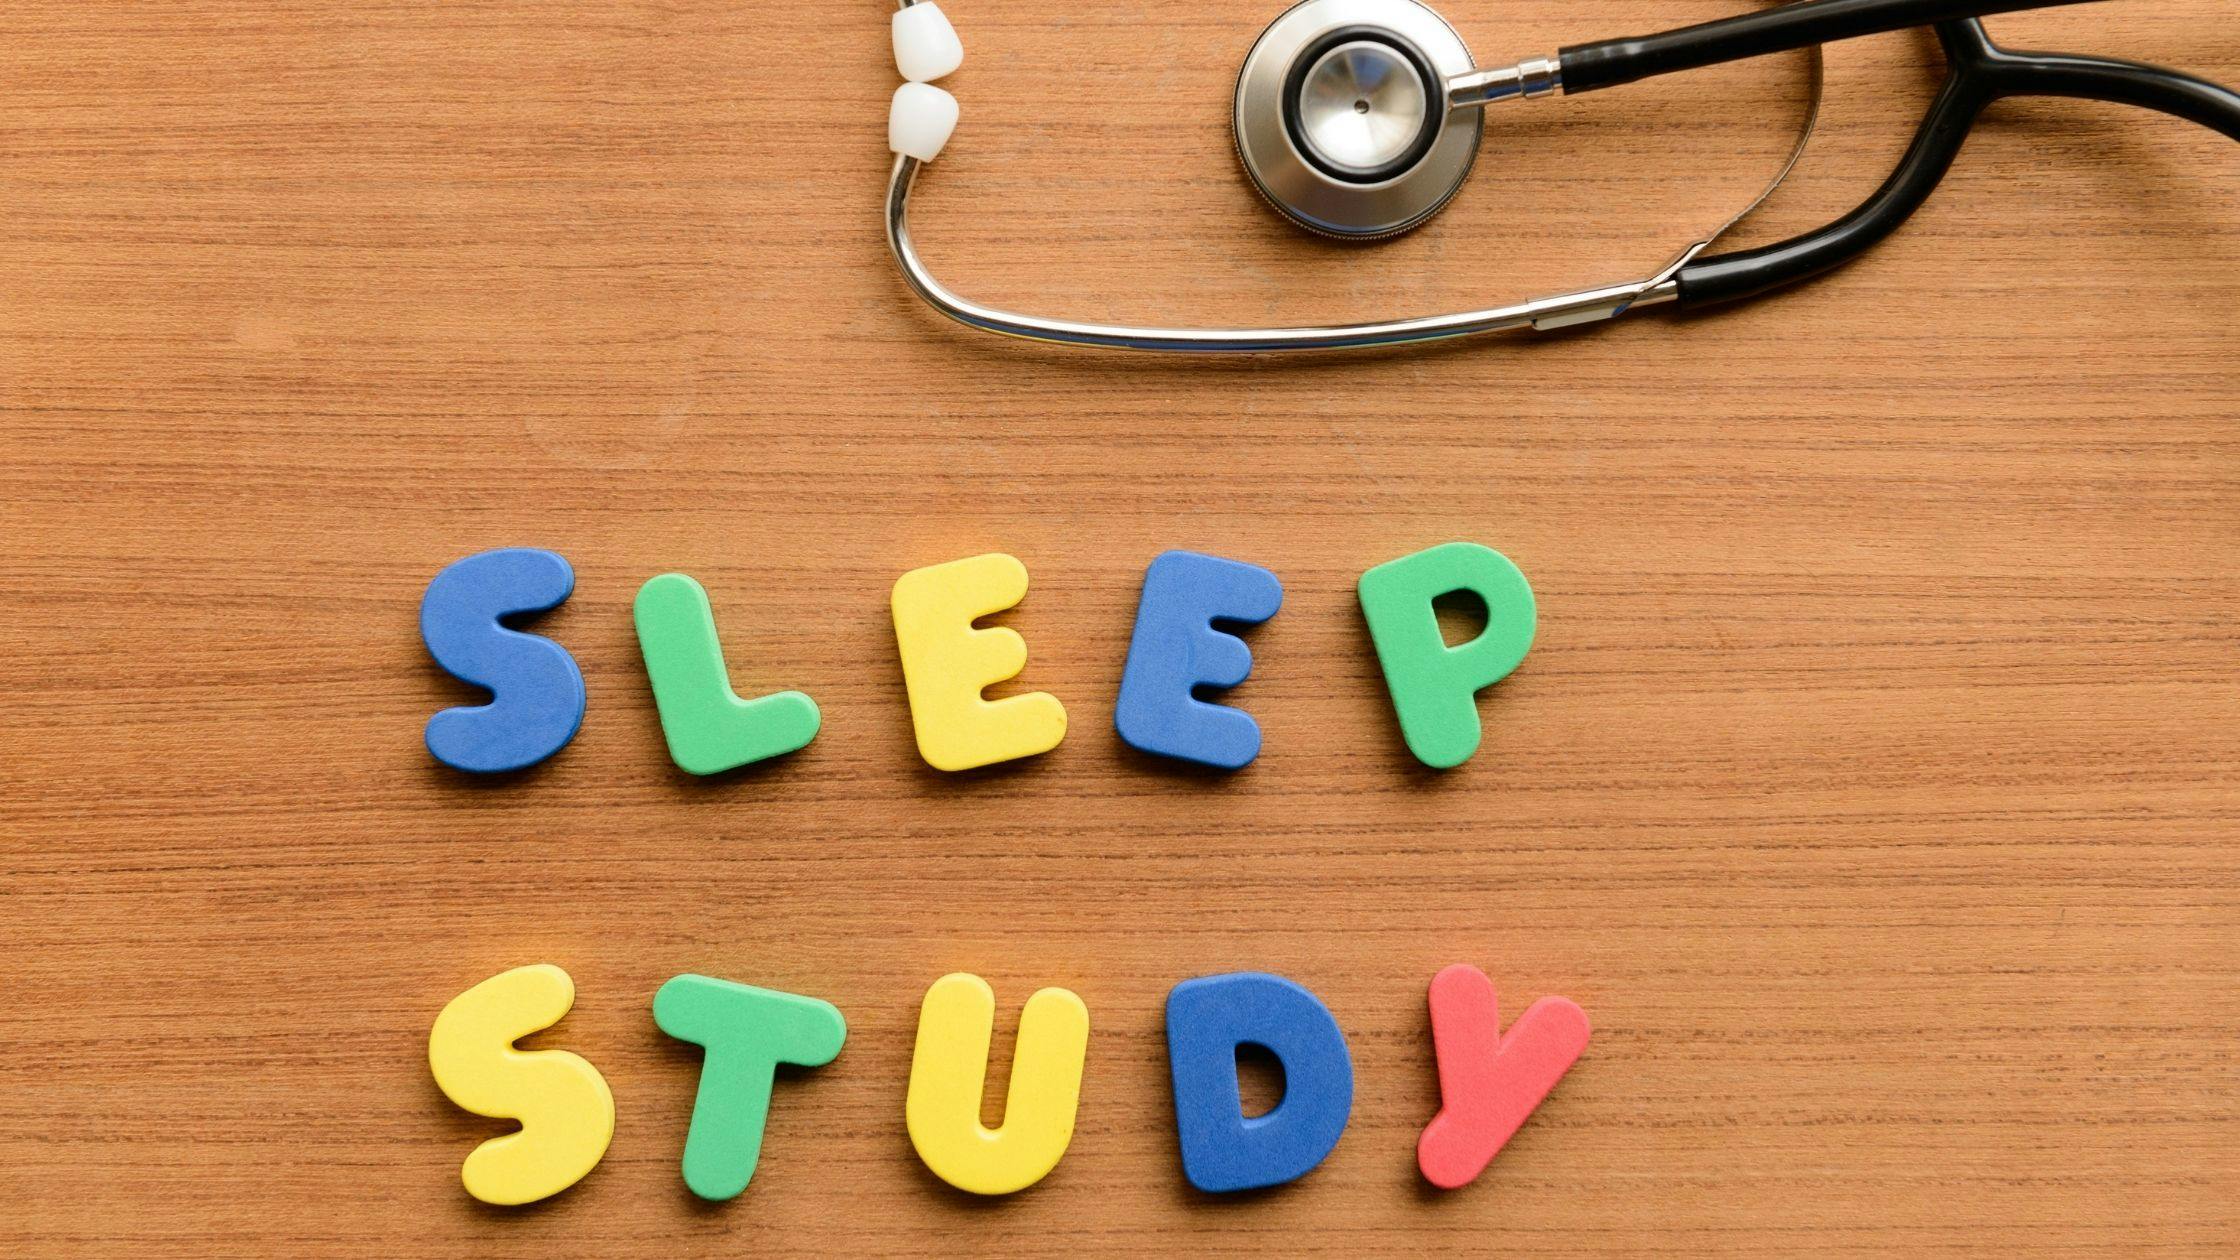 the word sleep study is made of colorful letters and a stethoscope on a wooden table .